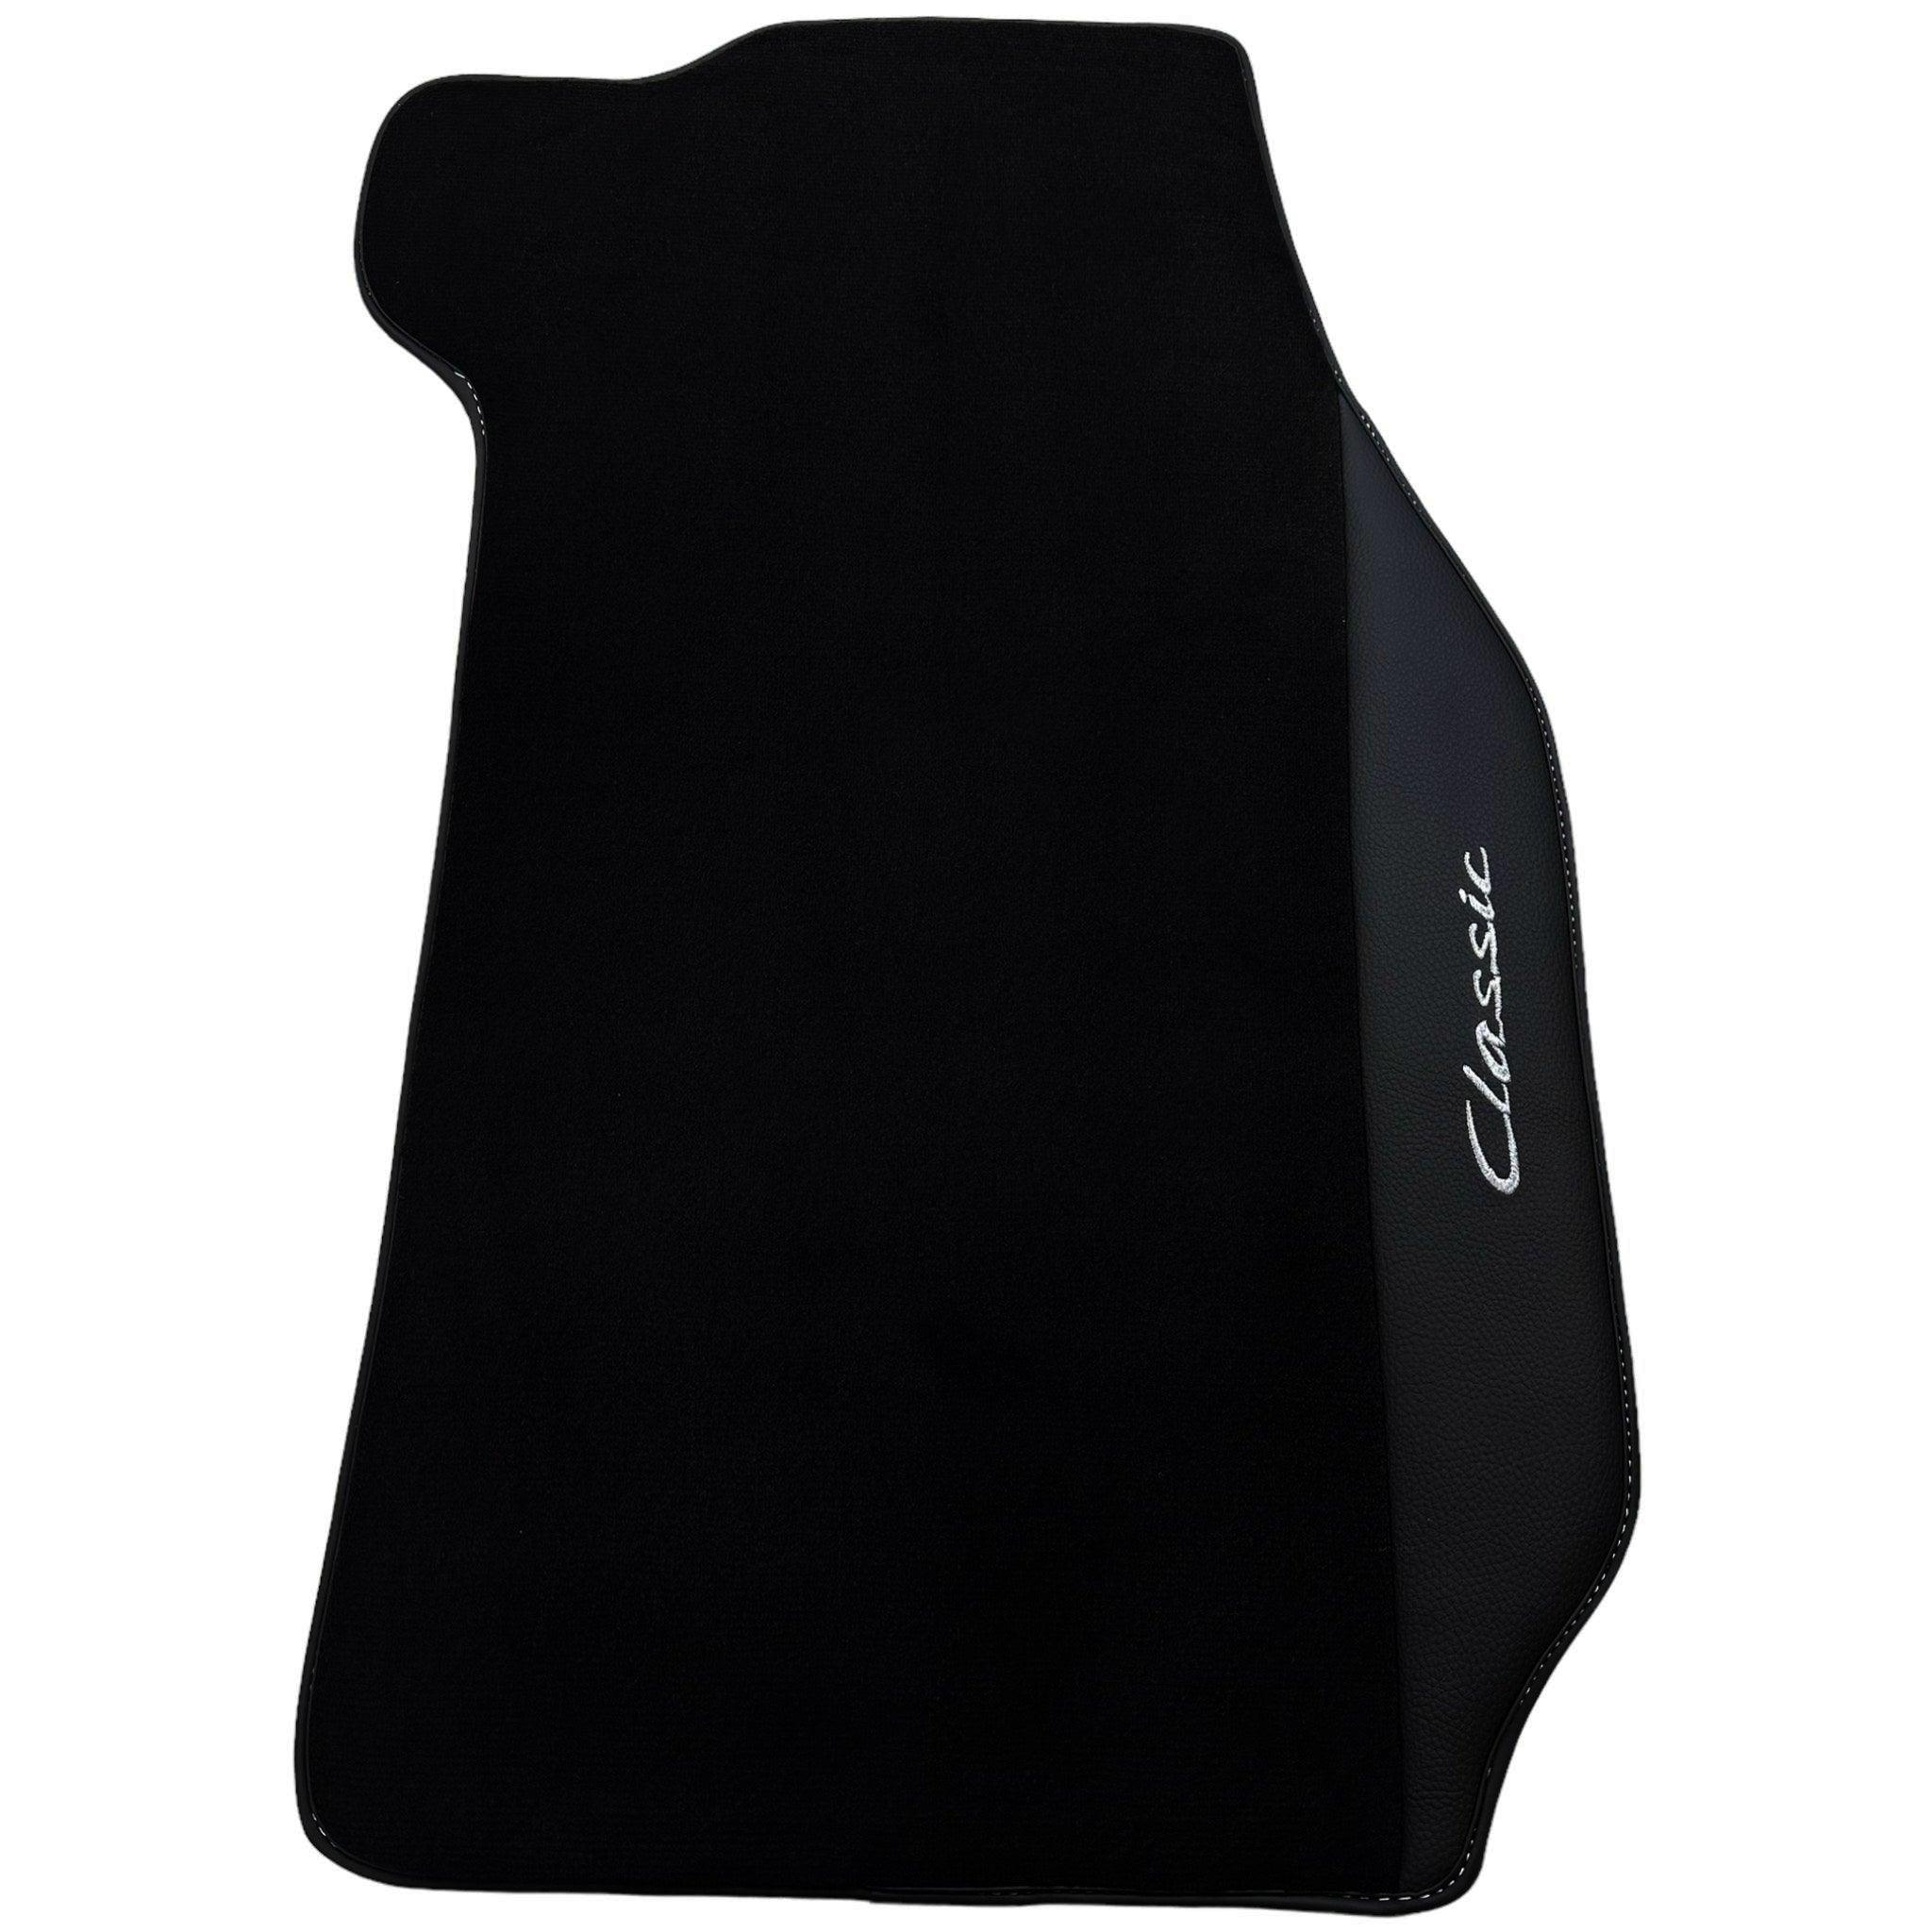 Black Floor Mats for Porsche Classic 911 (1963-1989) with Leather